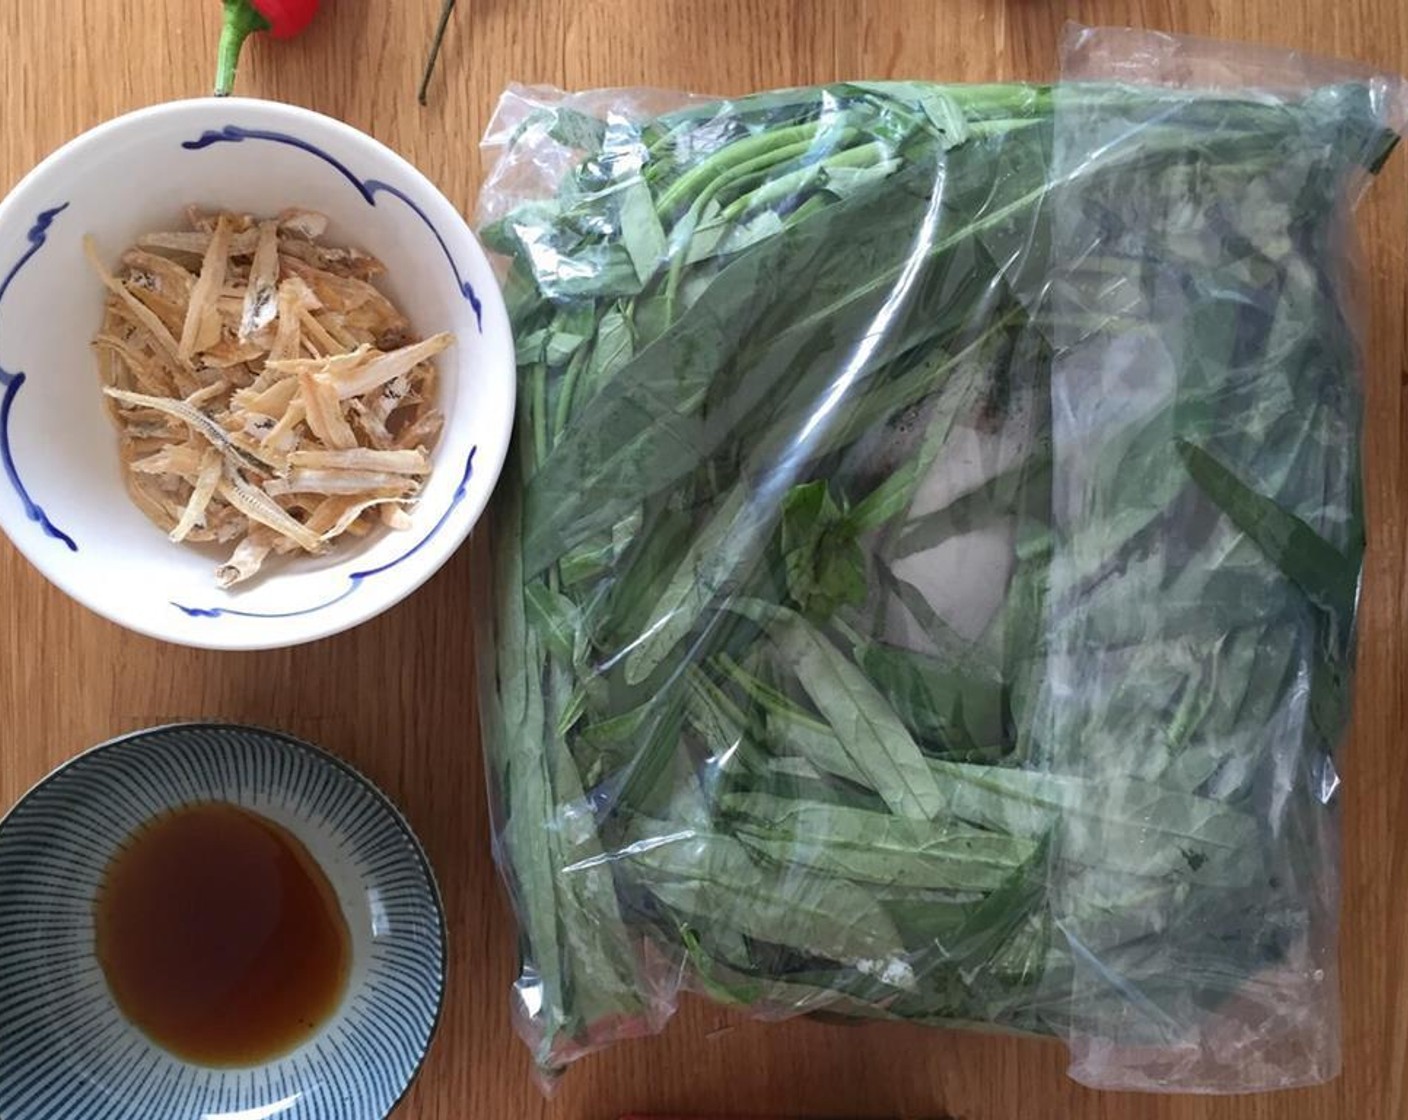 step 1 Gather the ingredients. Separate the the leaves of the Chinese Water Spinach (1 bunch) from the stems, and set both aside.